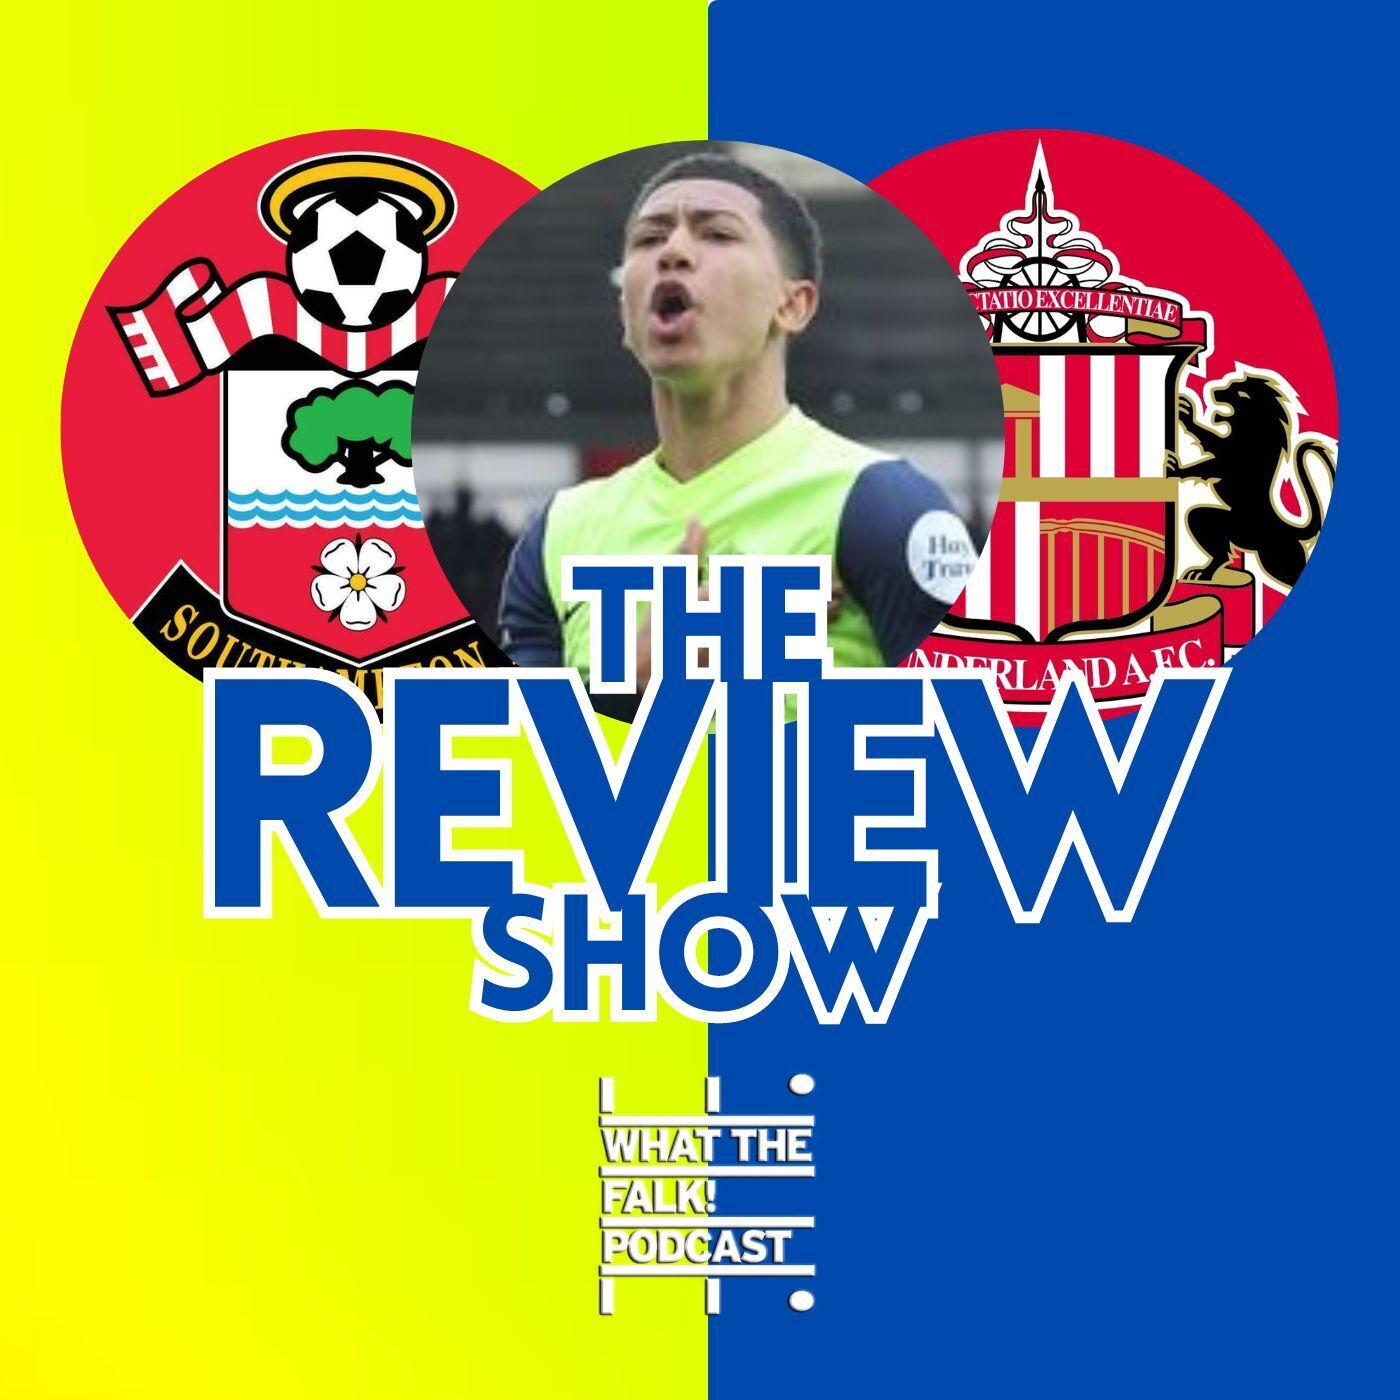 Southampton 4-2 Sunderland | EFL Championship Review - What The Falk Podcast